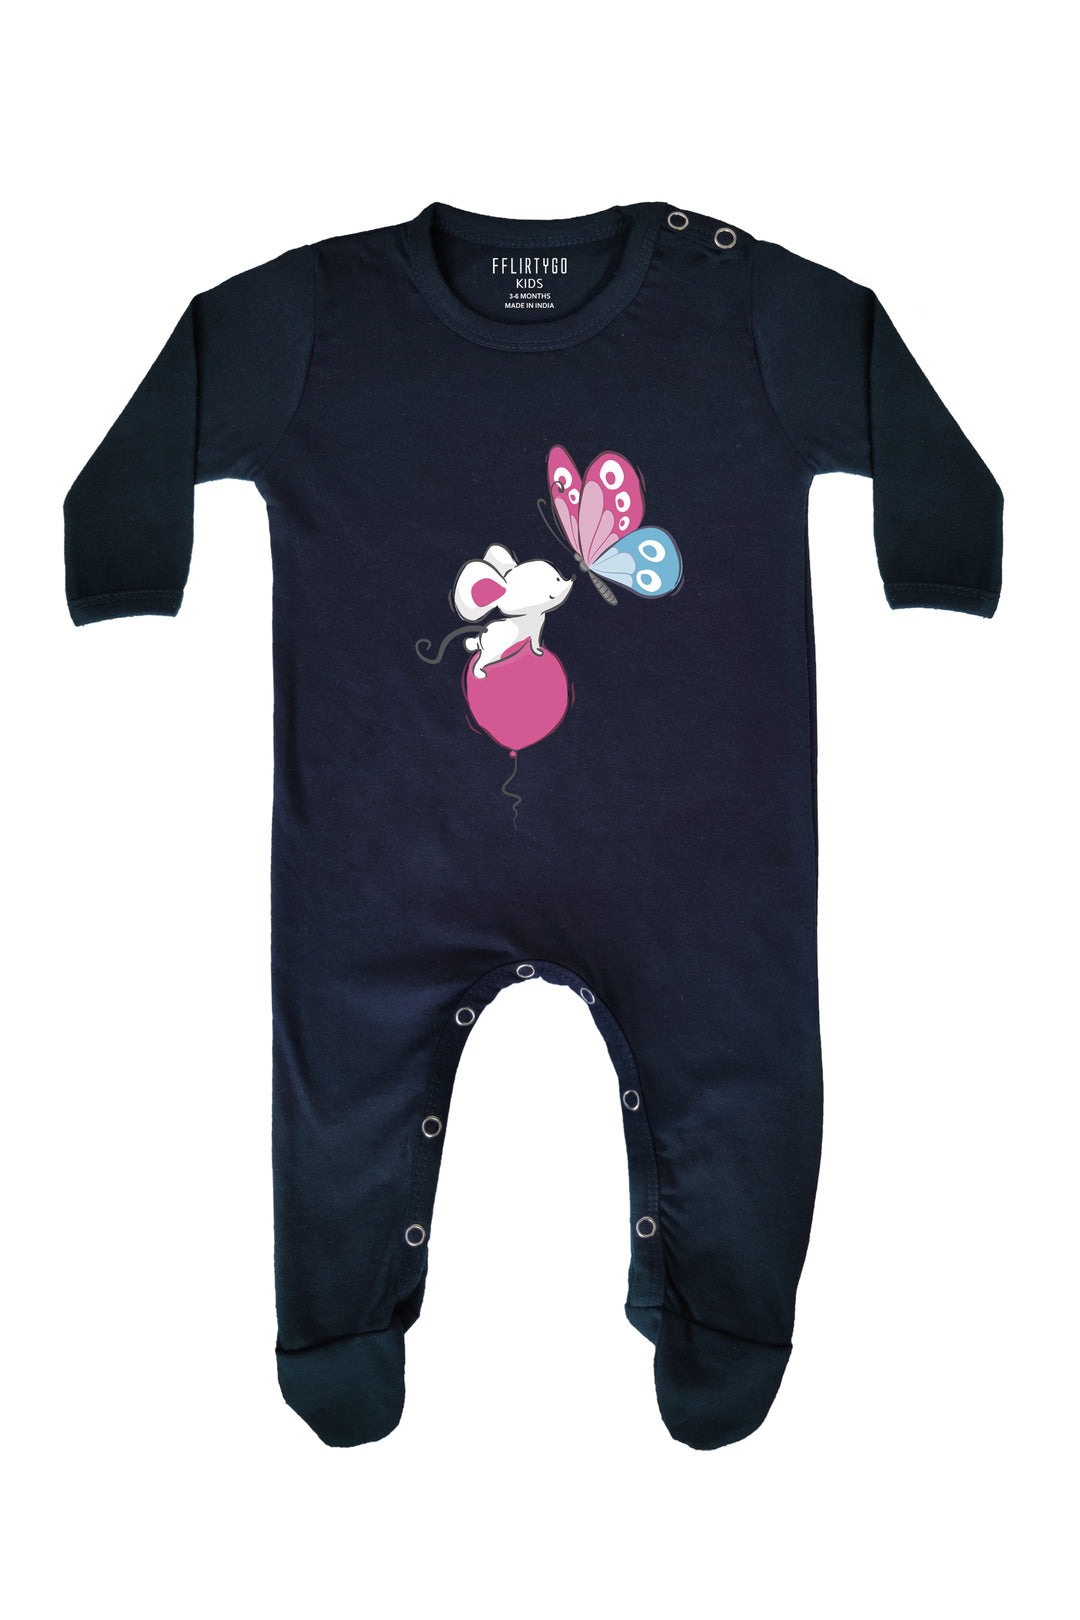 Rat On Balloon and Butterfly Baby Romper | Onesies